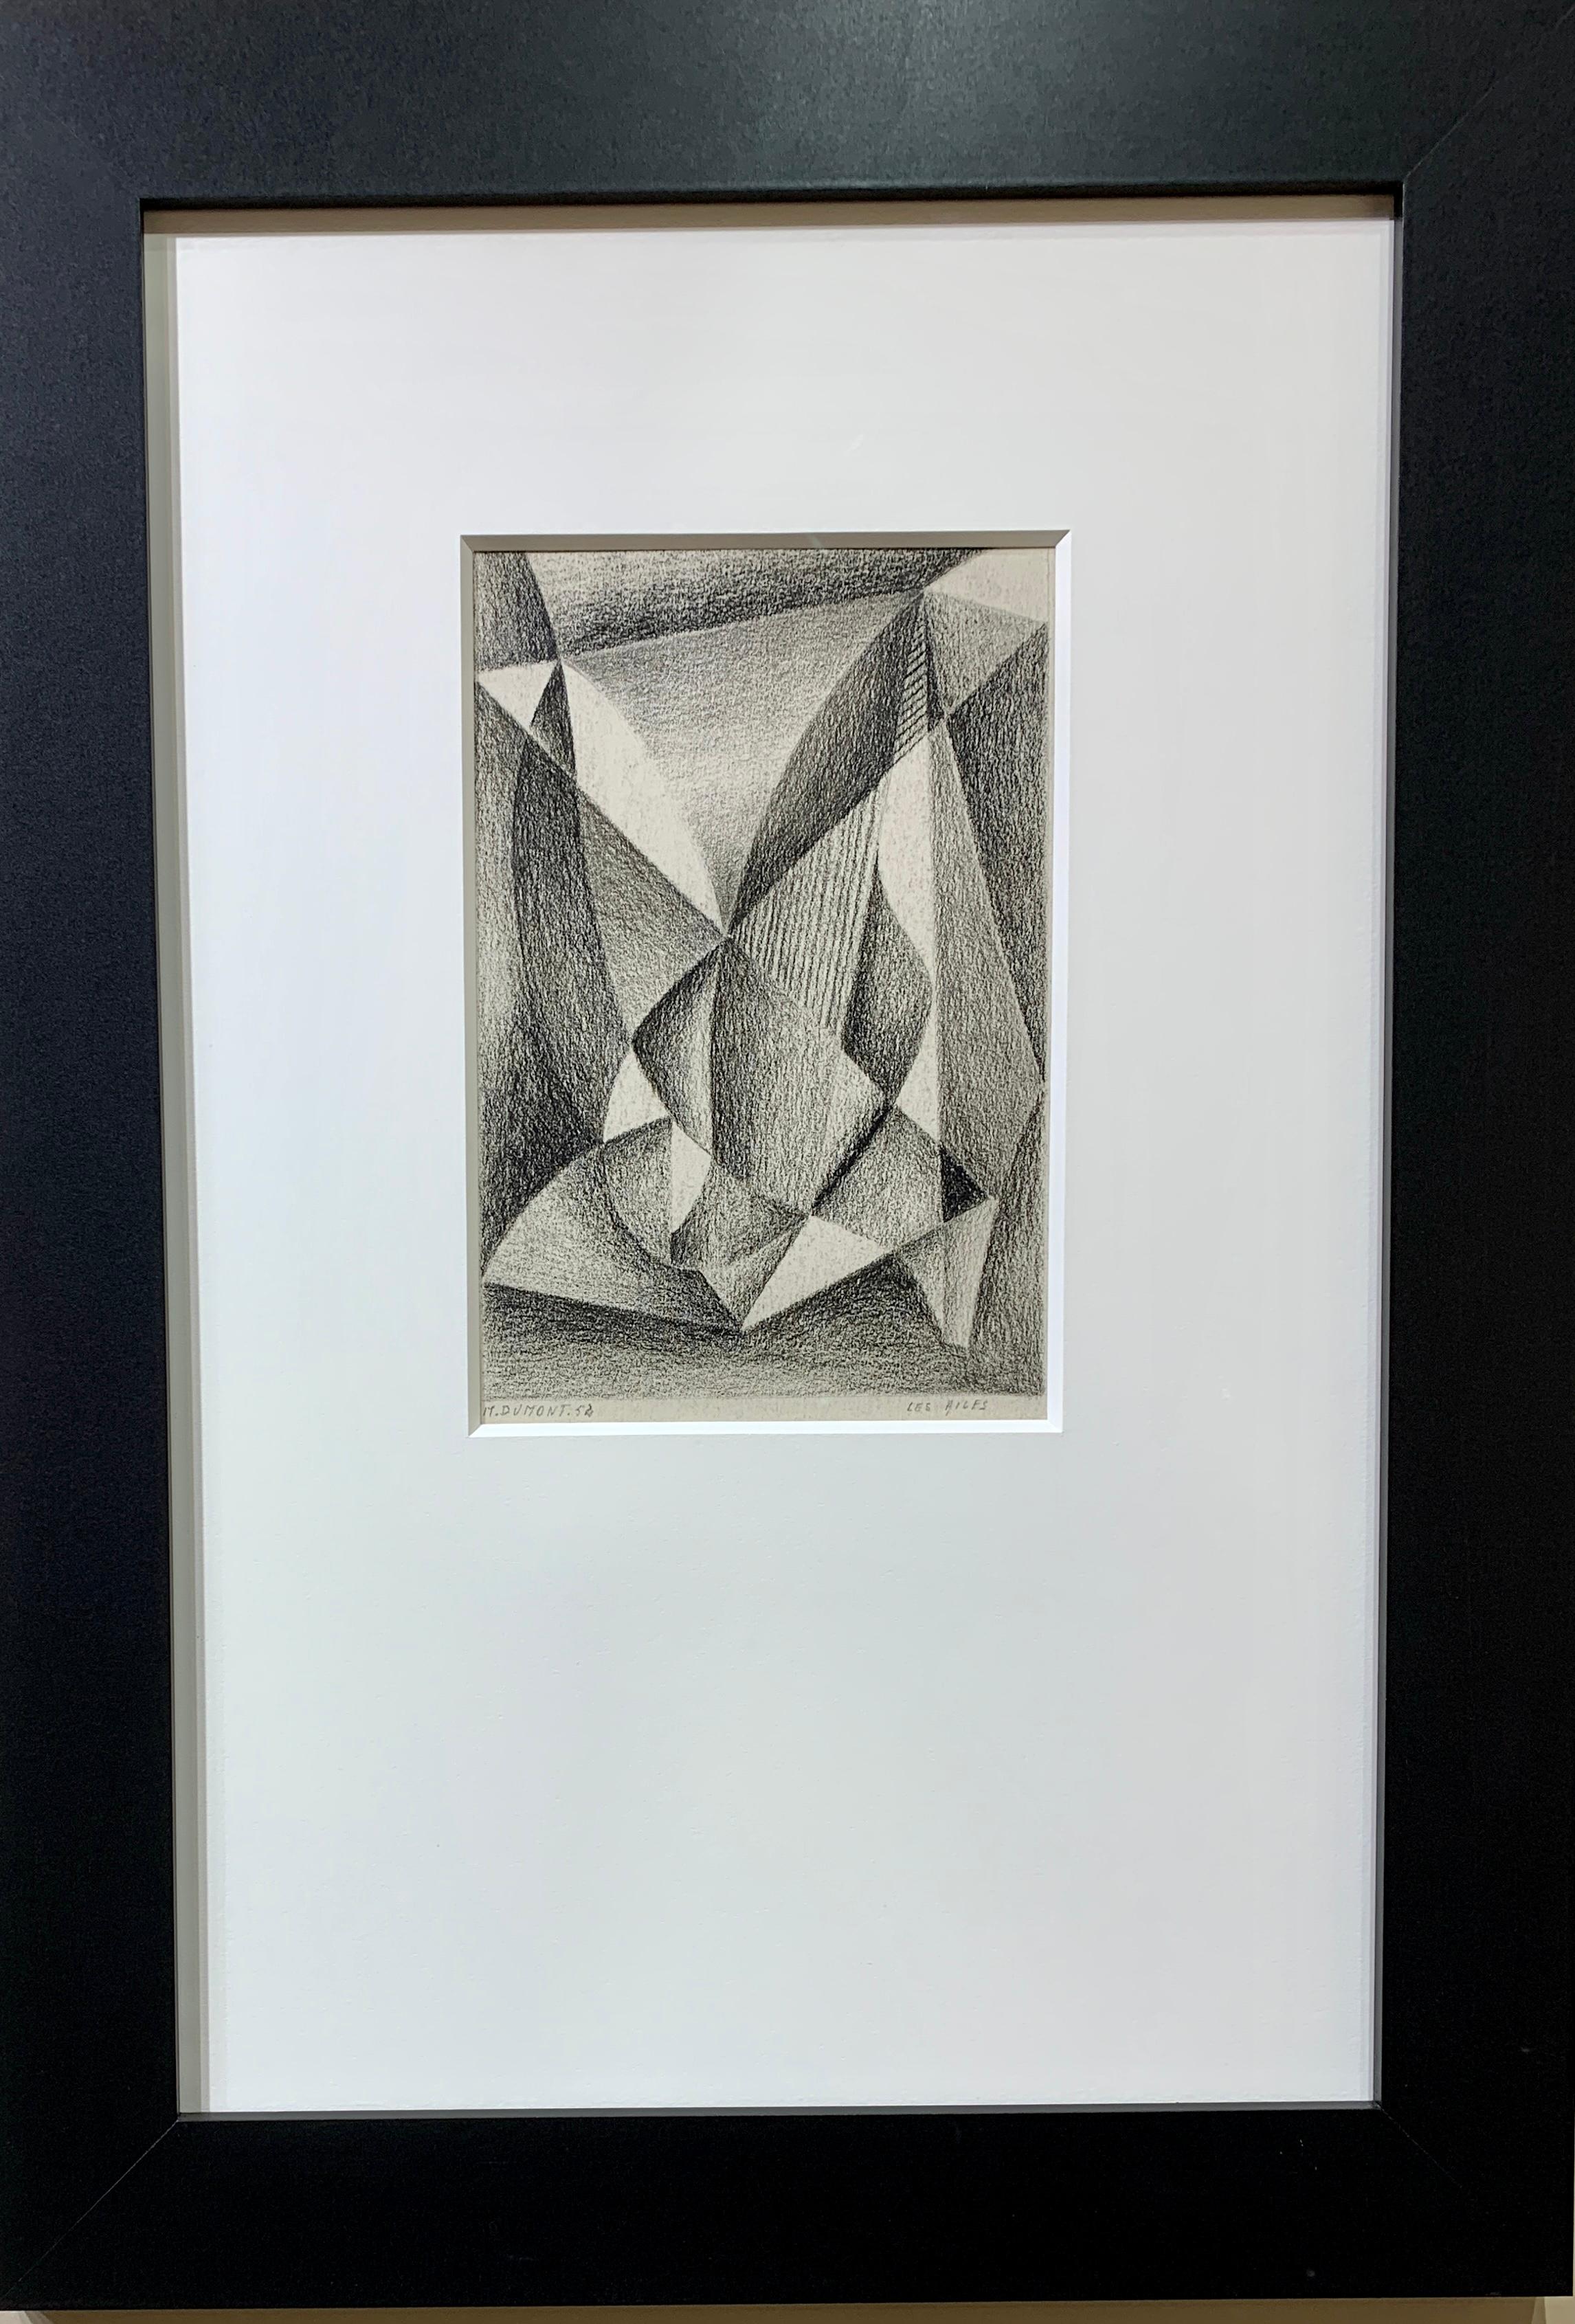 Marcel Dumont Abstract Drawing - 20th century Belgium, Black and White Abstract pencil drawing, Etude